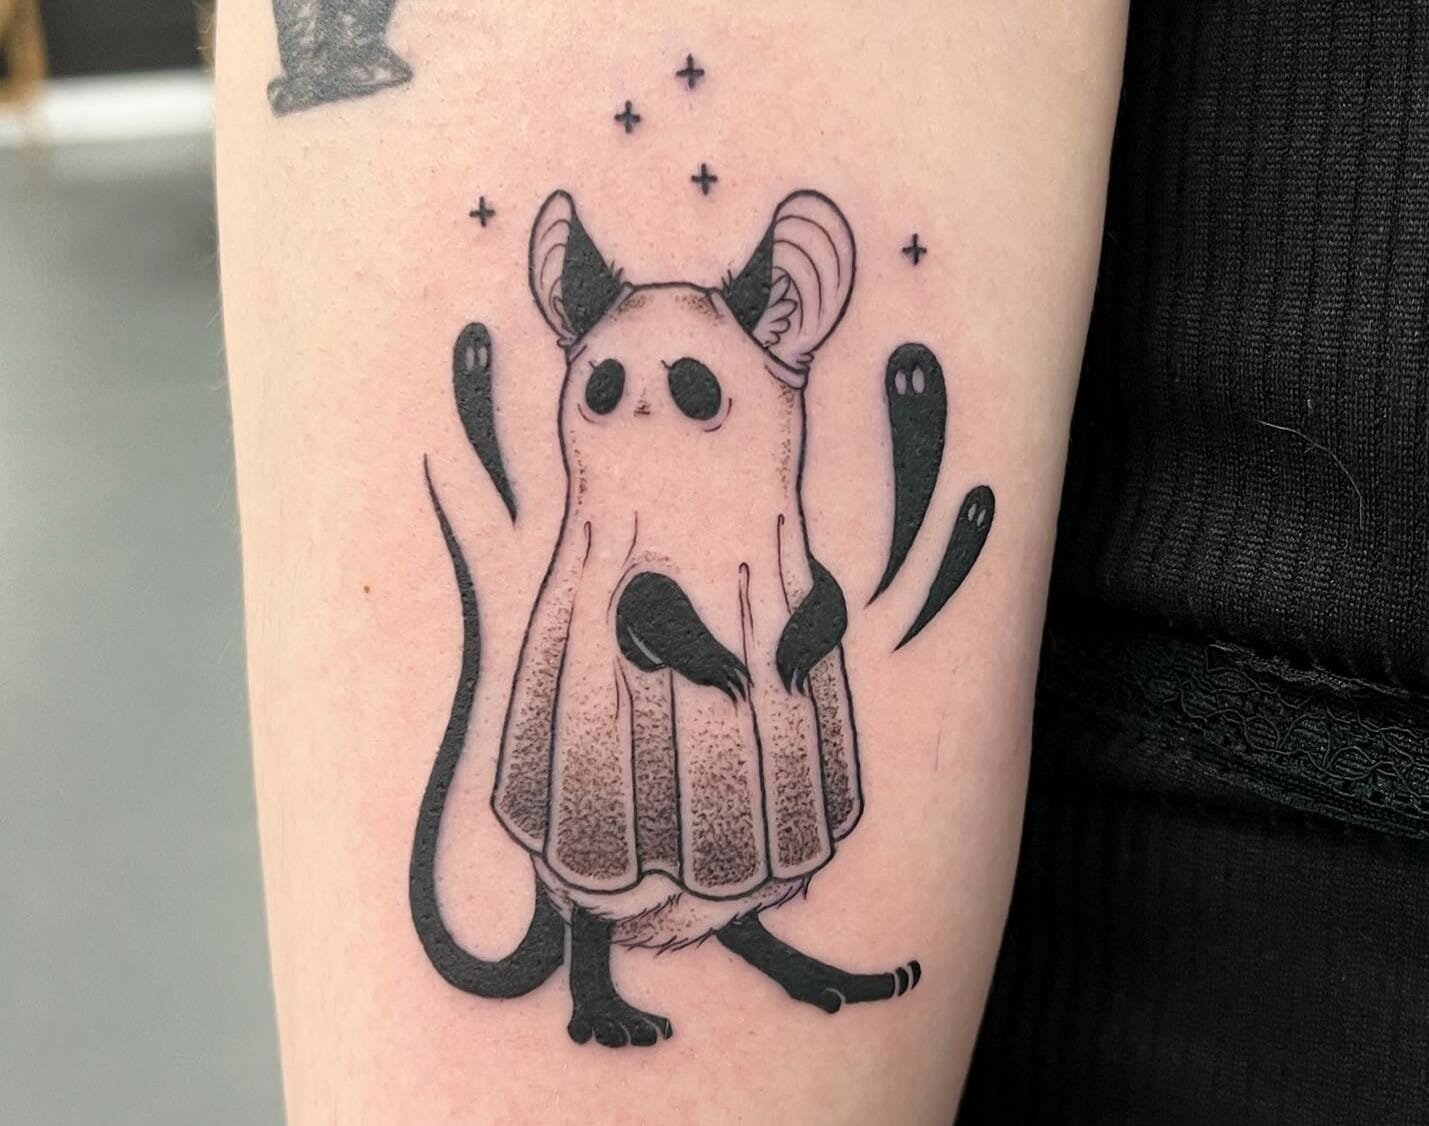 21 Cute N Spooky Tattoos For Anyone Who Loves All Things Supernatural   Spooky tattoos Friend tattoos Bff tattoos